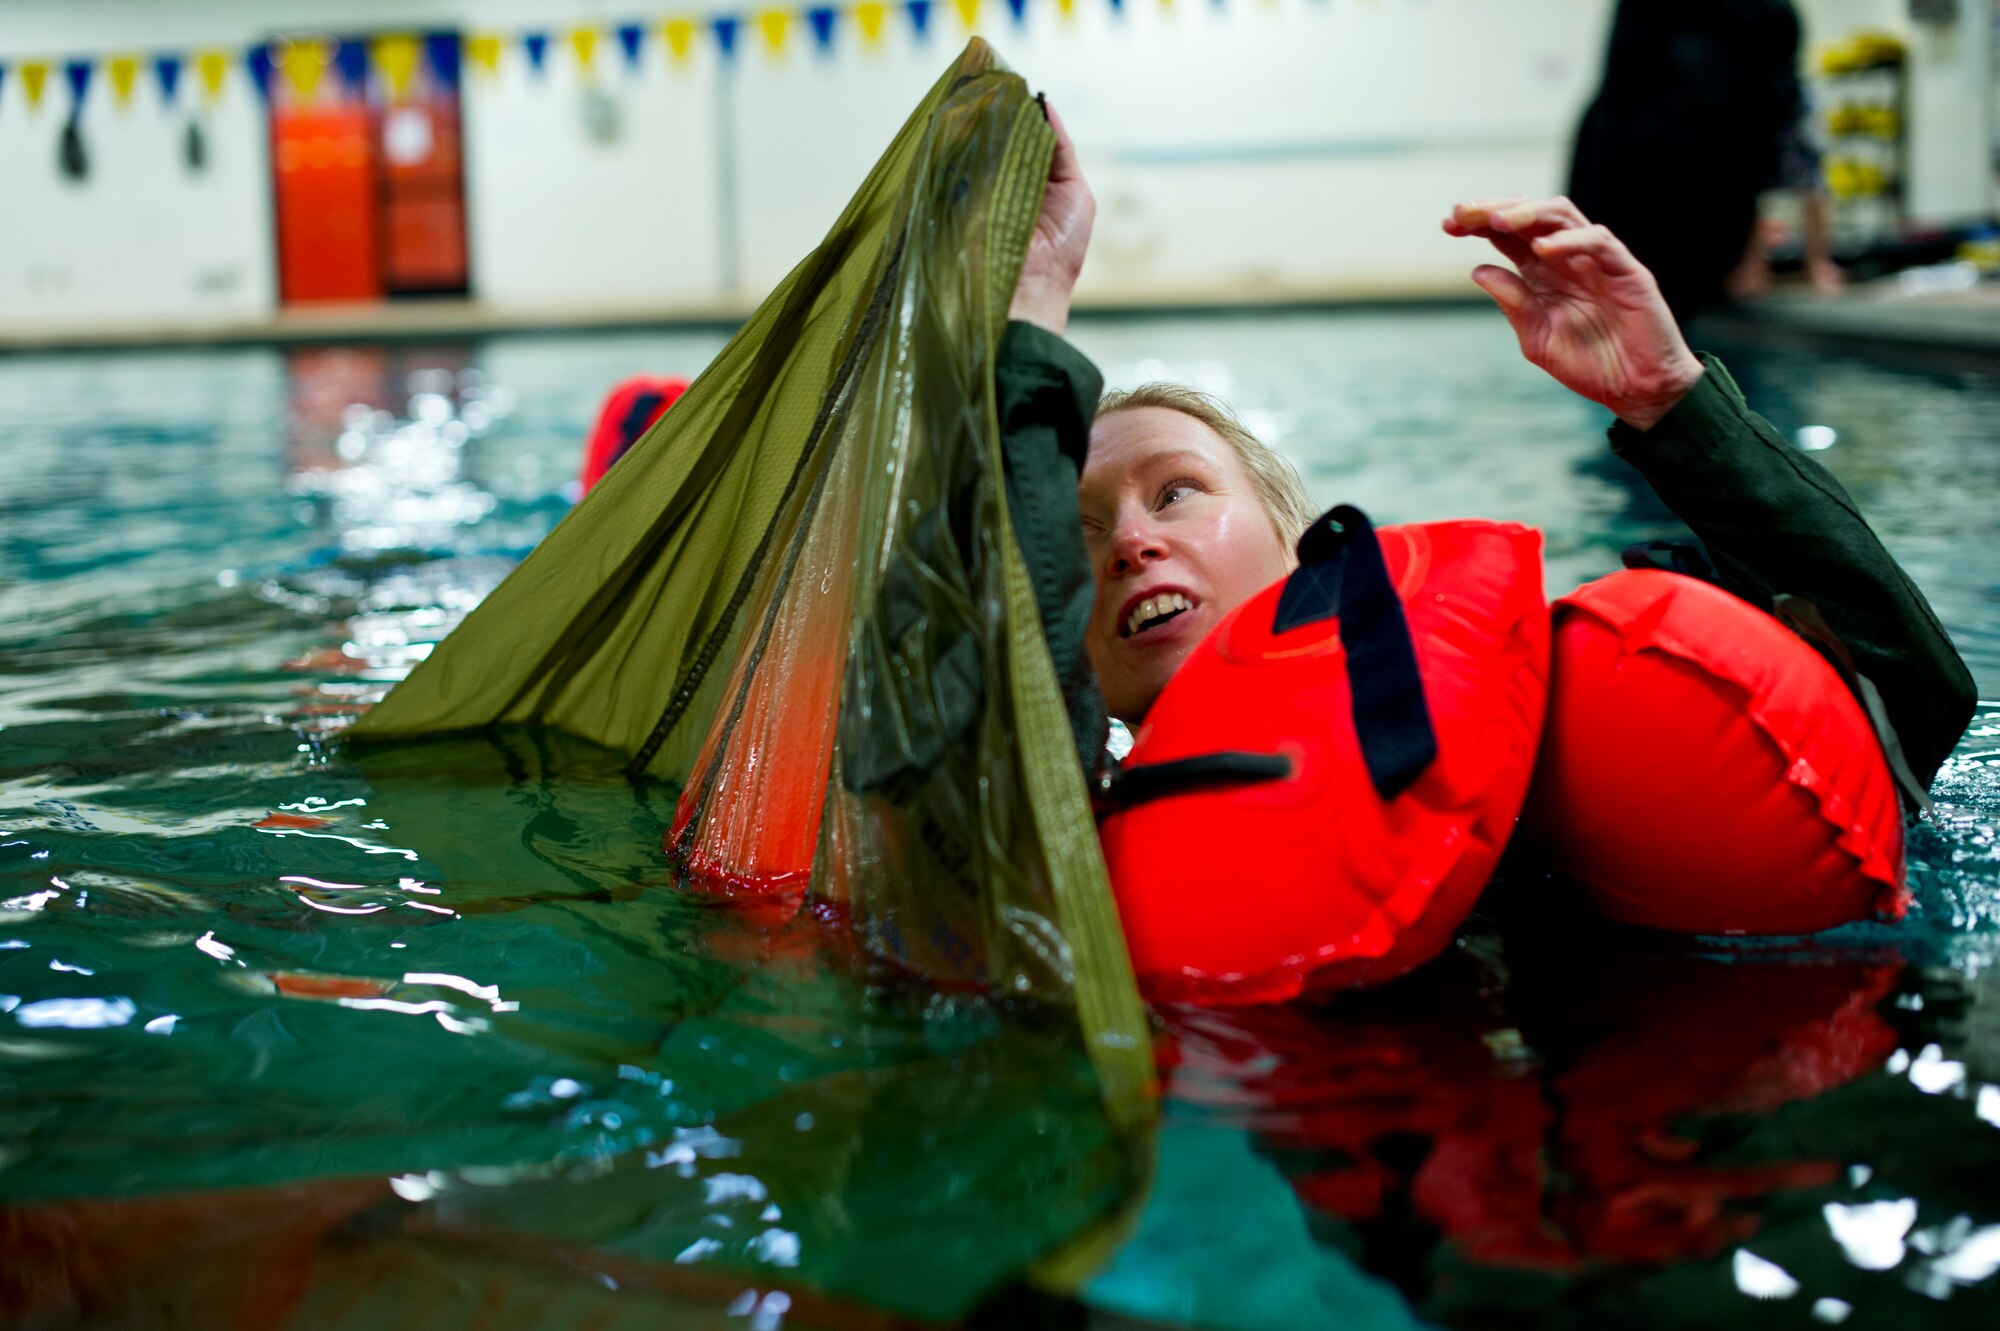 An aircrew member of the 133rd Operations Group prepares to make her way underneath a parachute during water survival training at Foss Swim School in Eden Prairie, Minn., Jan 24, 2014. Airmen had to climb under the parachute and come out on the other side unassisted to prepare them for an over-water ditching scenario. (U.S. Air National Guard photo by Staff Sgt. Austen Adriaens/Released)